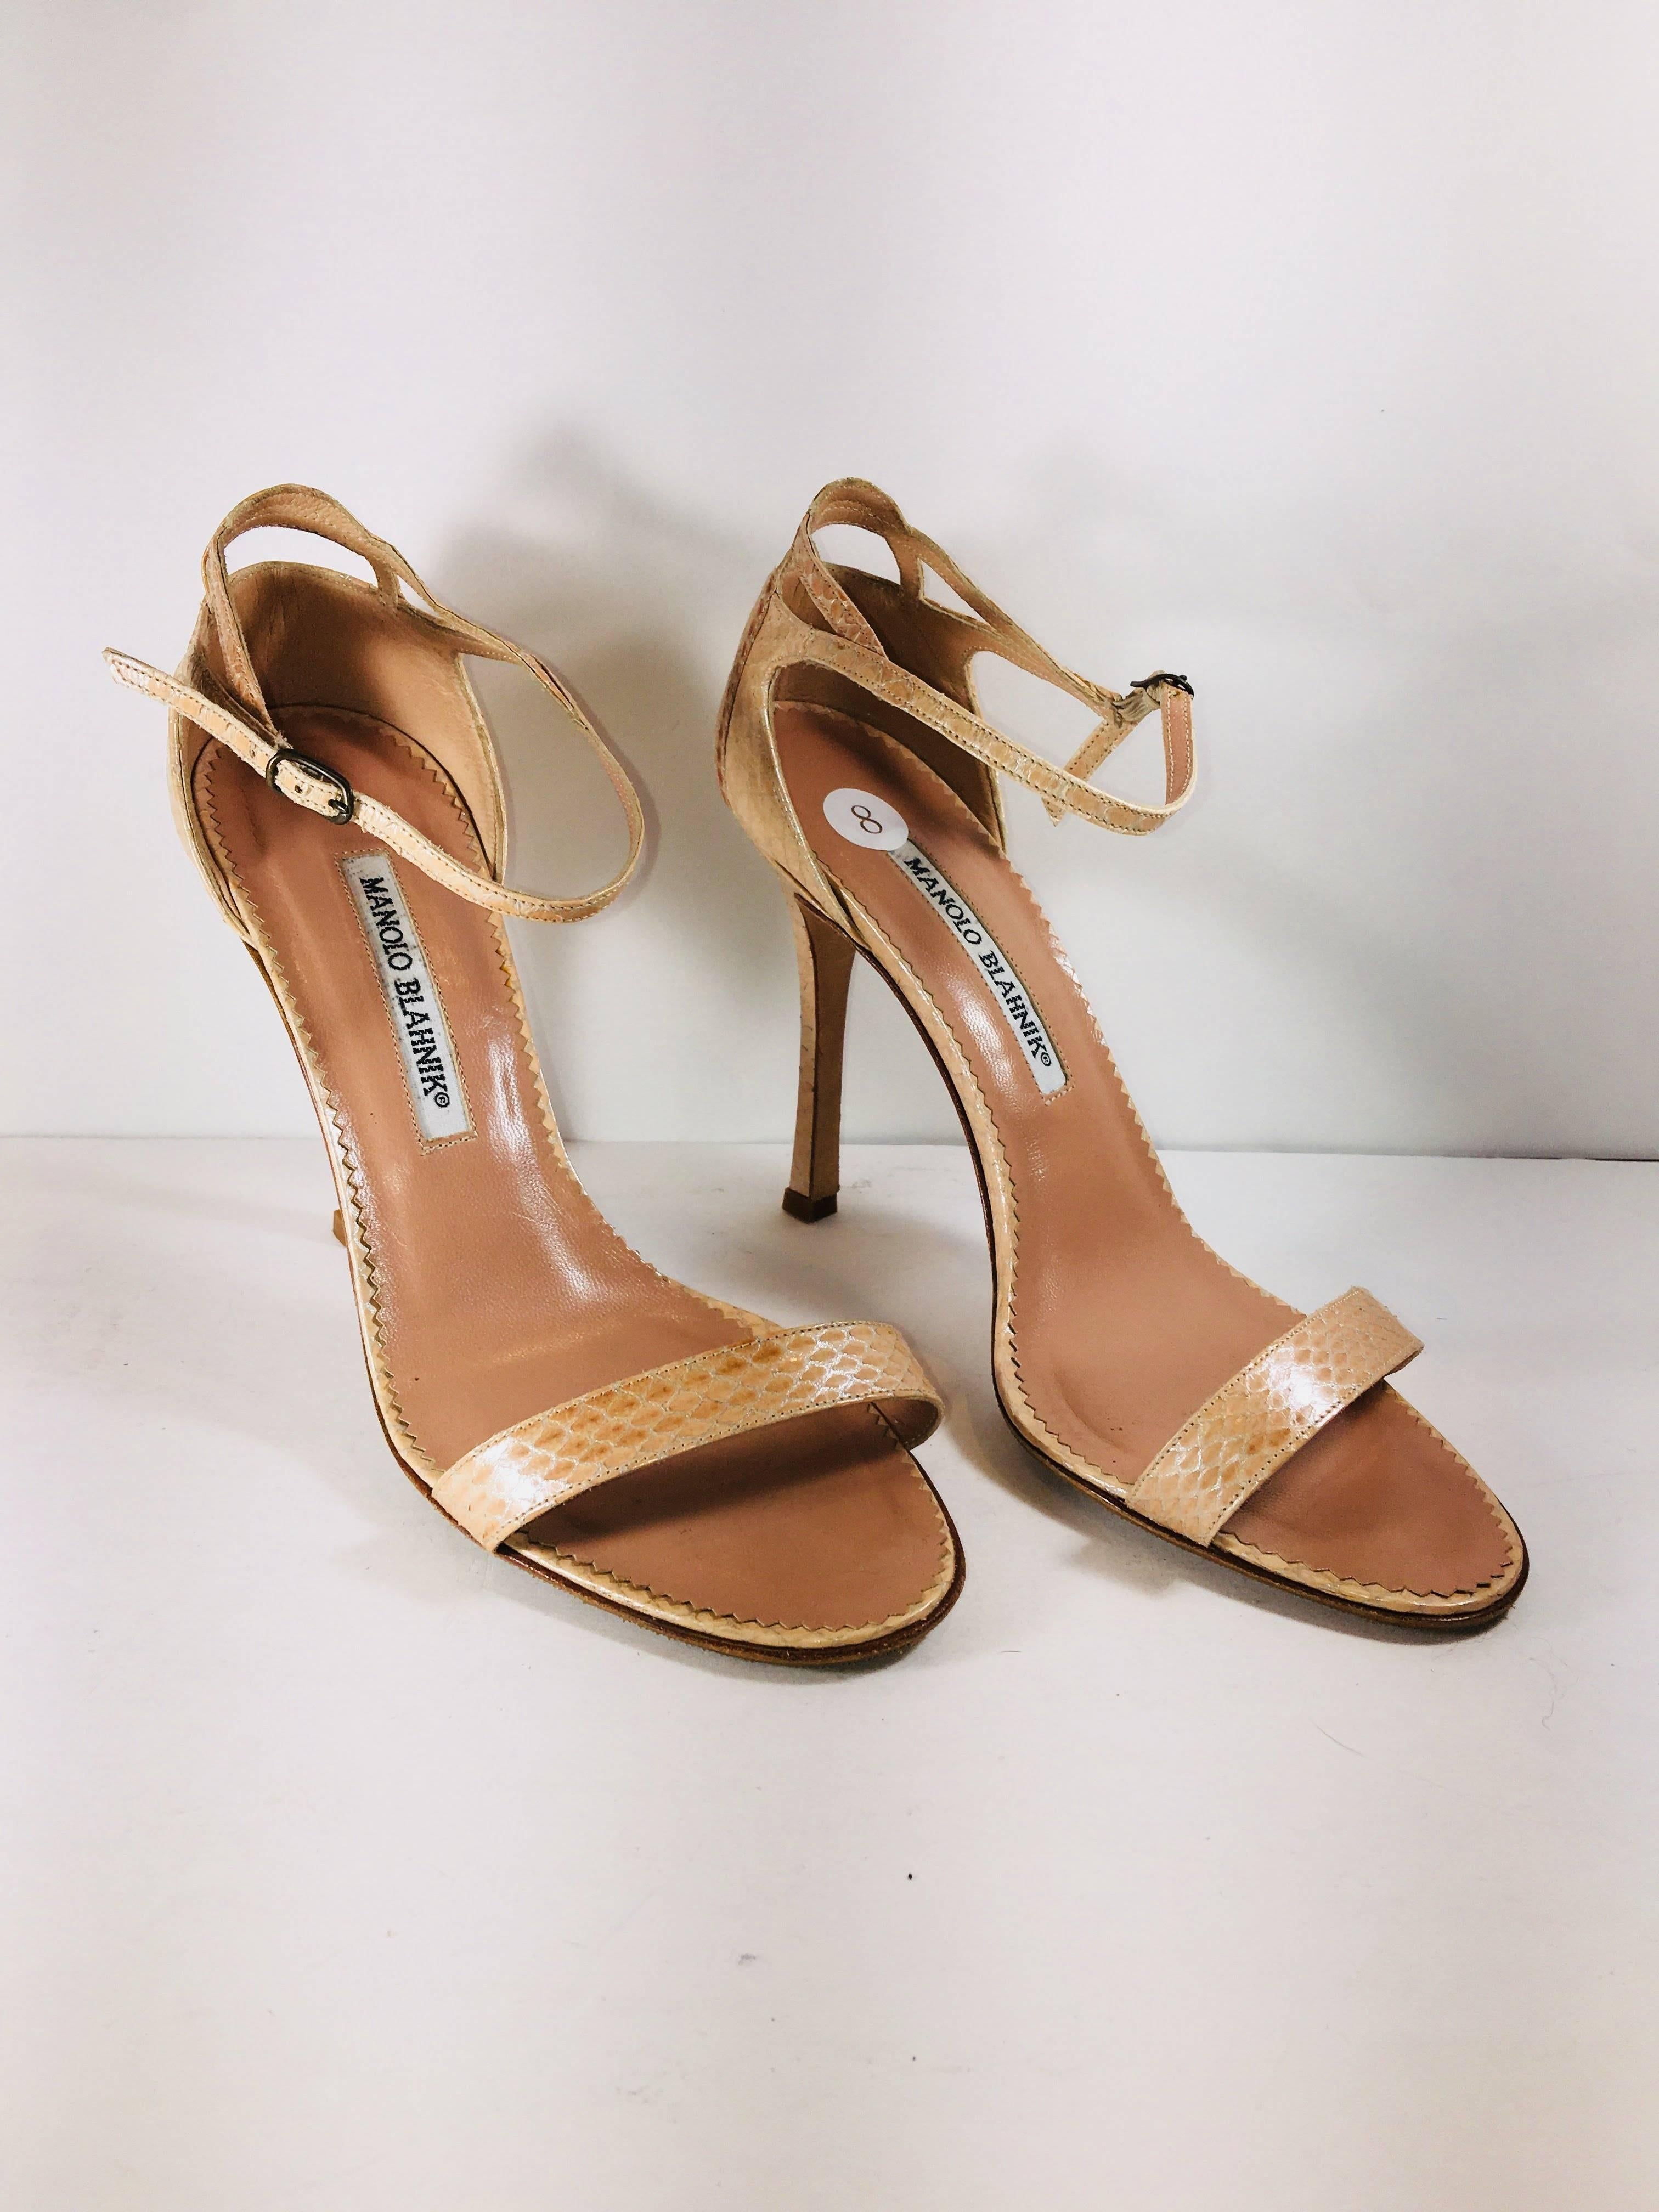 Manolo Blahnik Tan Leather "Python" Heels with Silver Detail.